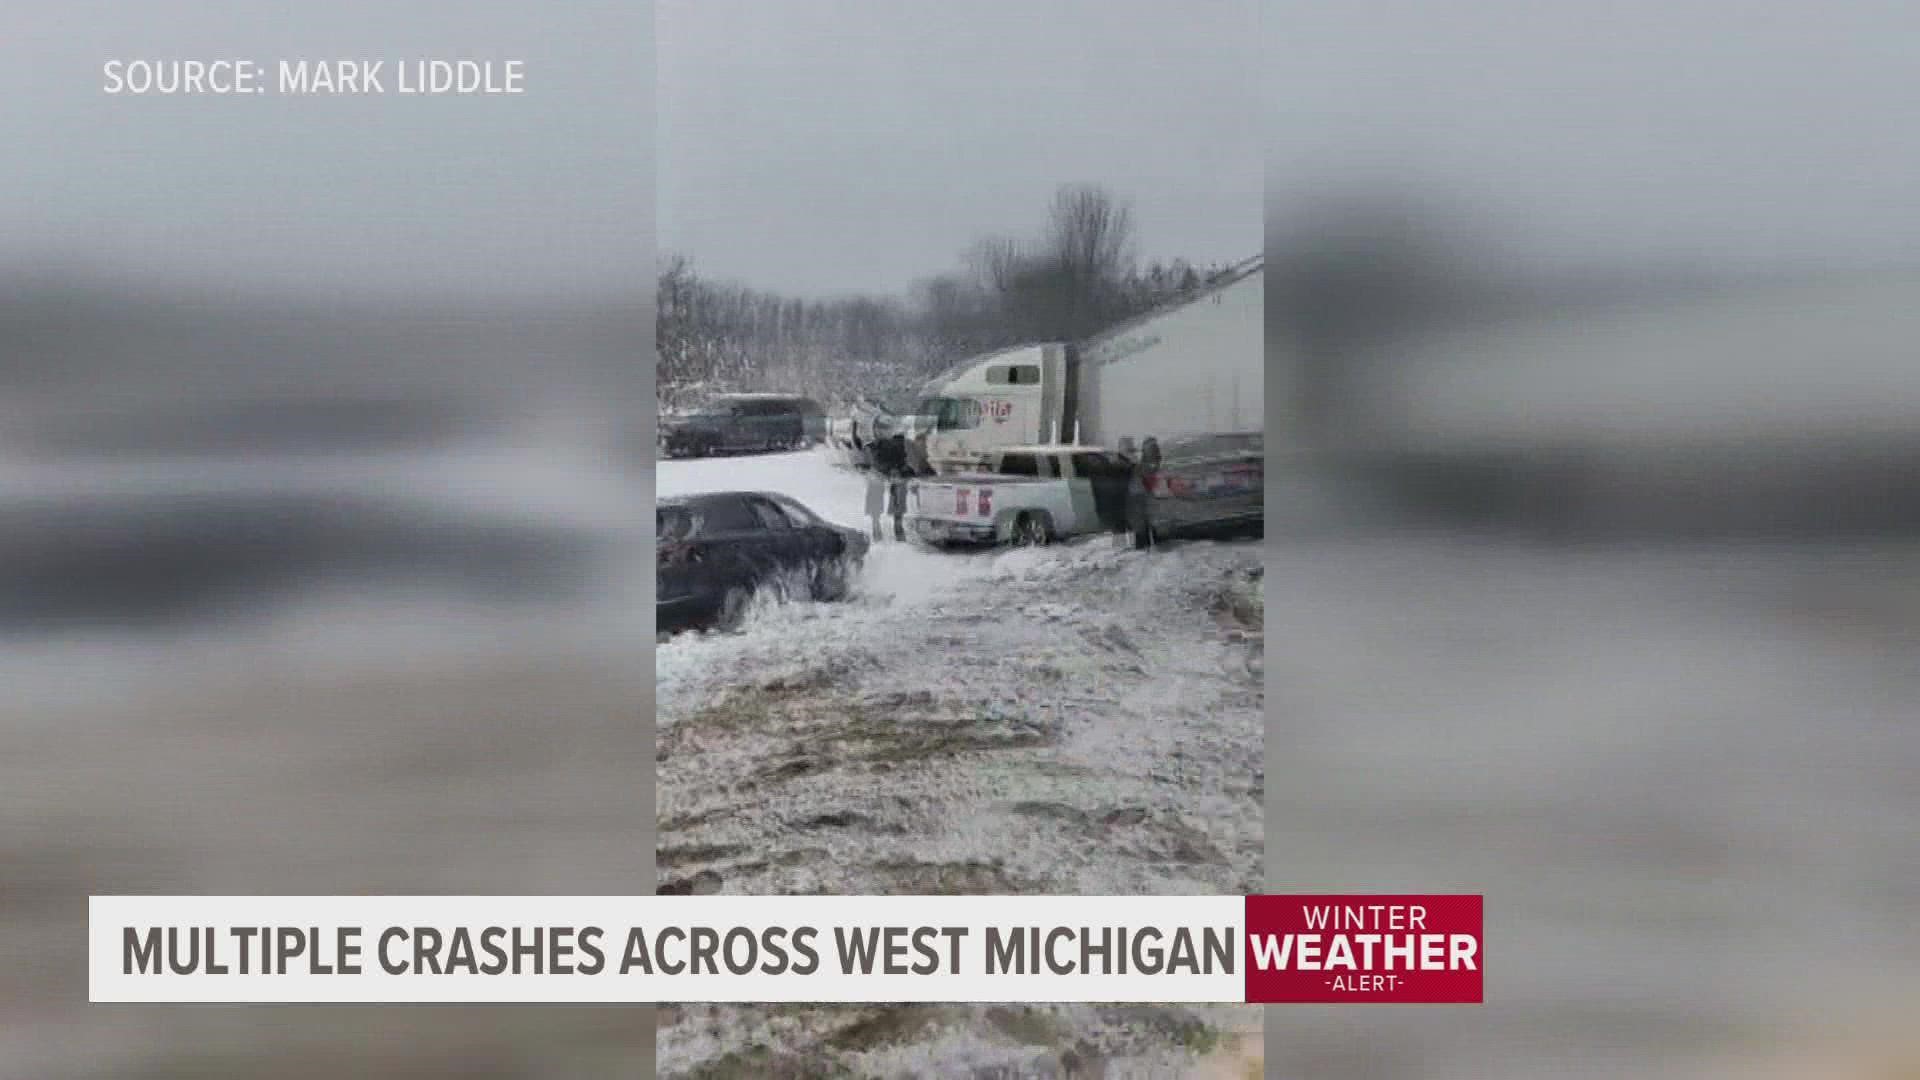 More than 20 vehicles piled up in a chain-reaction crash on SB US 131 near D Avenue in Kalamazoo County. Several injuries were reported.